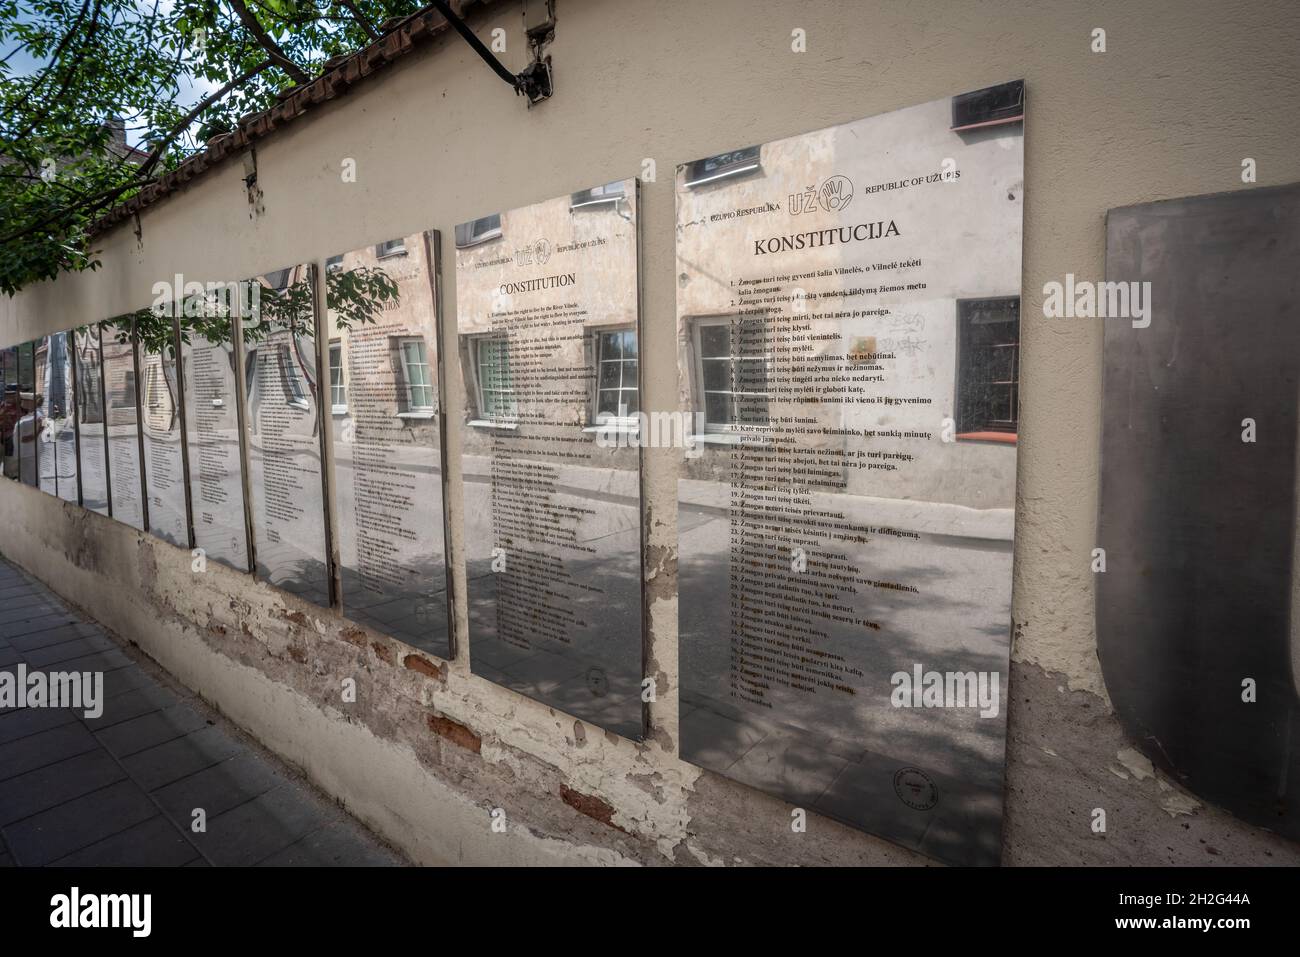 Constitution plaques of Republic of Uzupis translated in many languages at Uzupis district - Vilnius, Lithuania Stock Photo